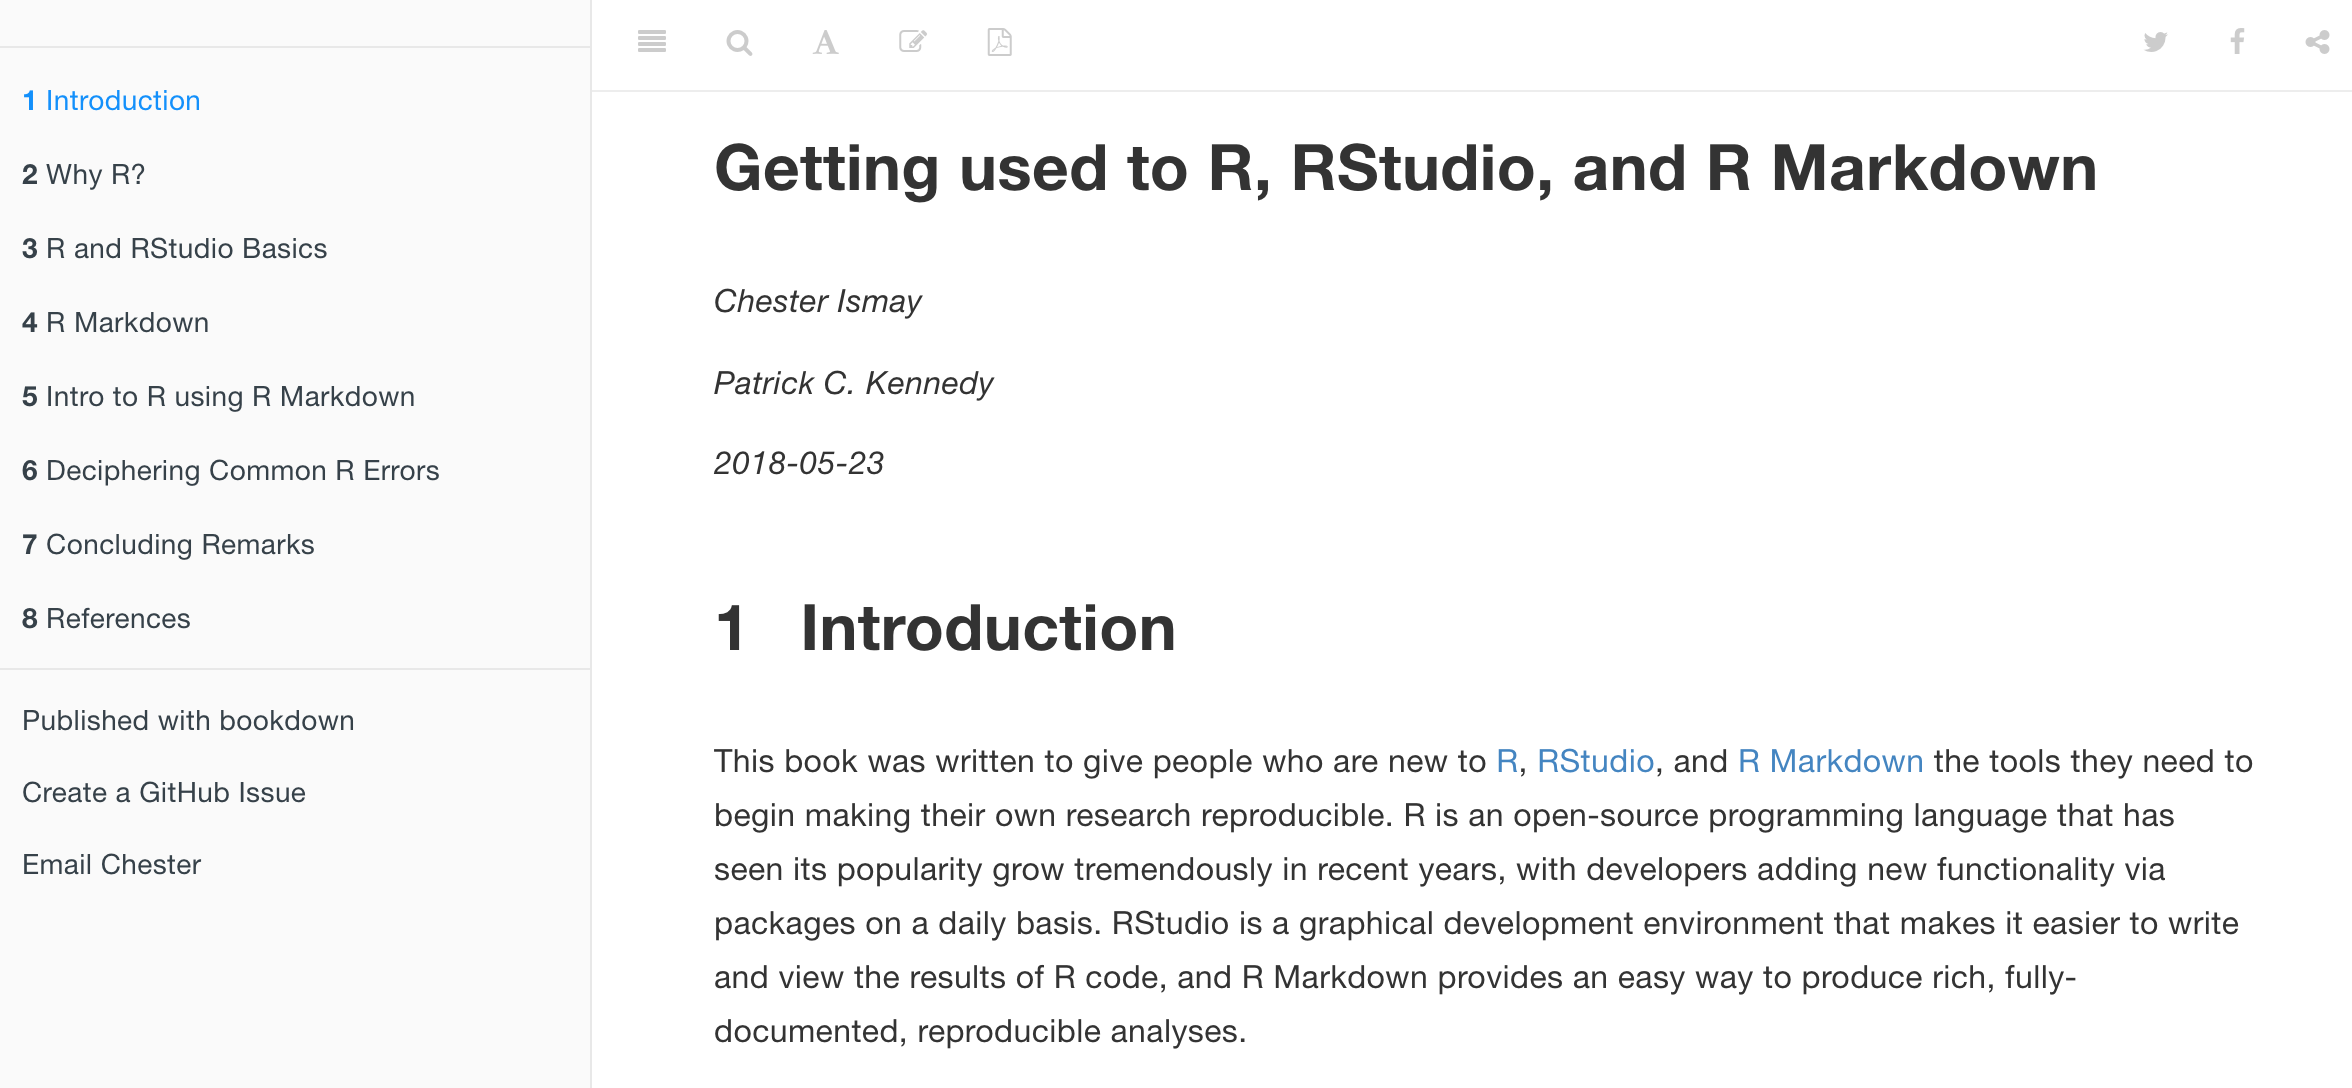 Preview of 'Getting Used to R, RStudio, and R Markdown'.